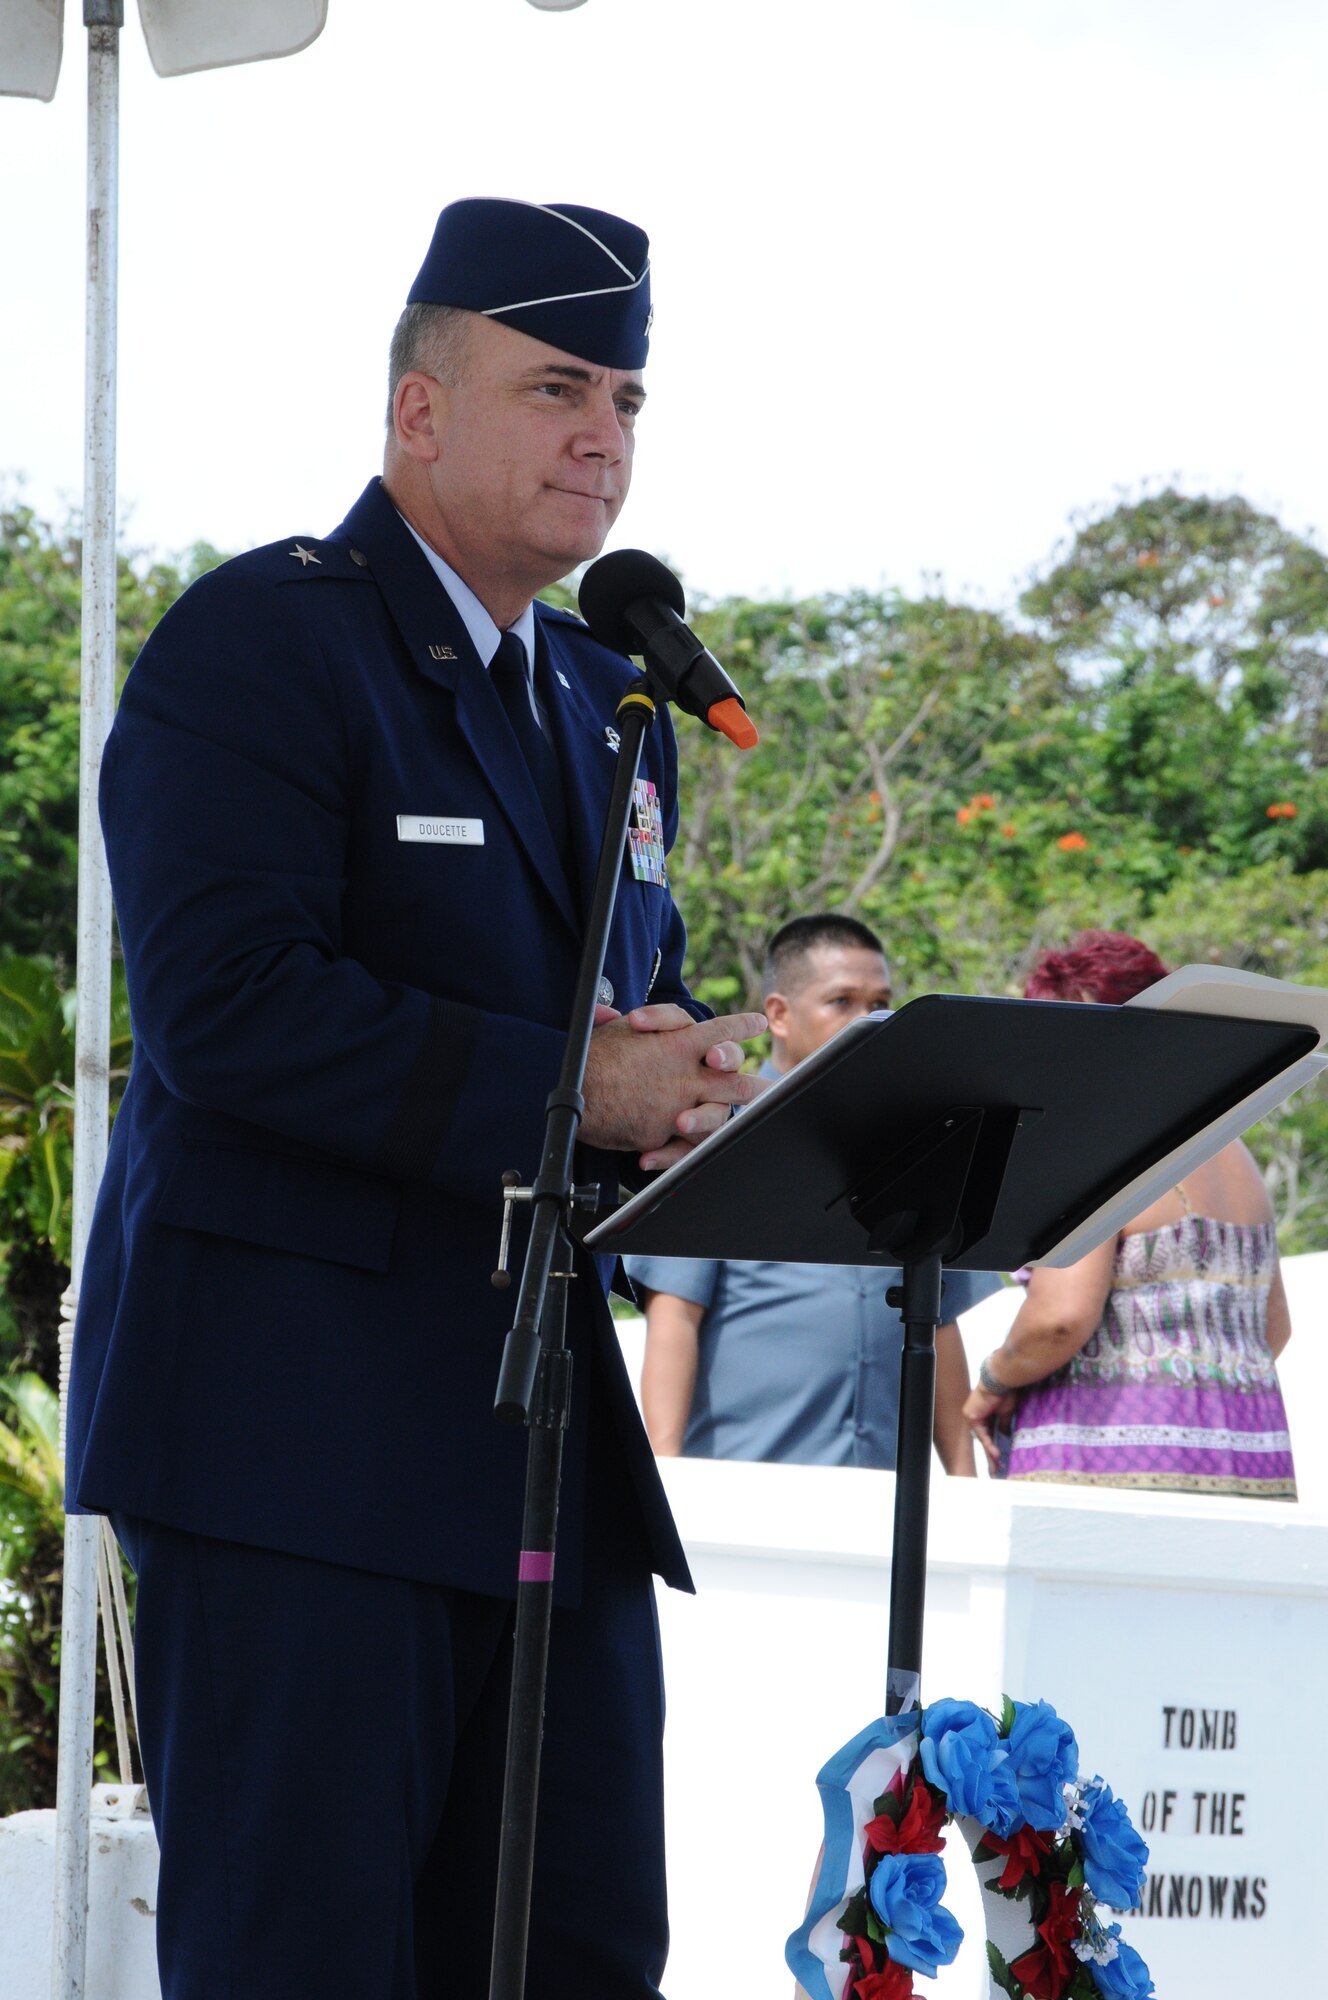 ANDERSEN AIR FORCE BASE, Guam- Brig. Gen. John Doucette, 36th Wing commander gives the Memorial Day speech during the Guam Veteran Cemetery ceremony, May 28.  “We pay homage to those who fought and gave their lives in past and present wars in the name of freedom,” said the general. (U.S. Air Force photo by Senior Airman Carlin Leslie/Released)